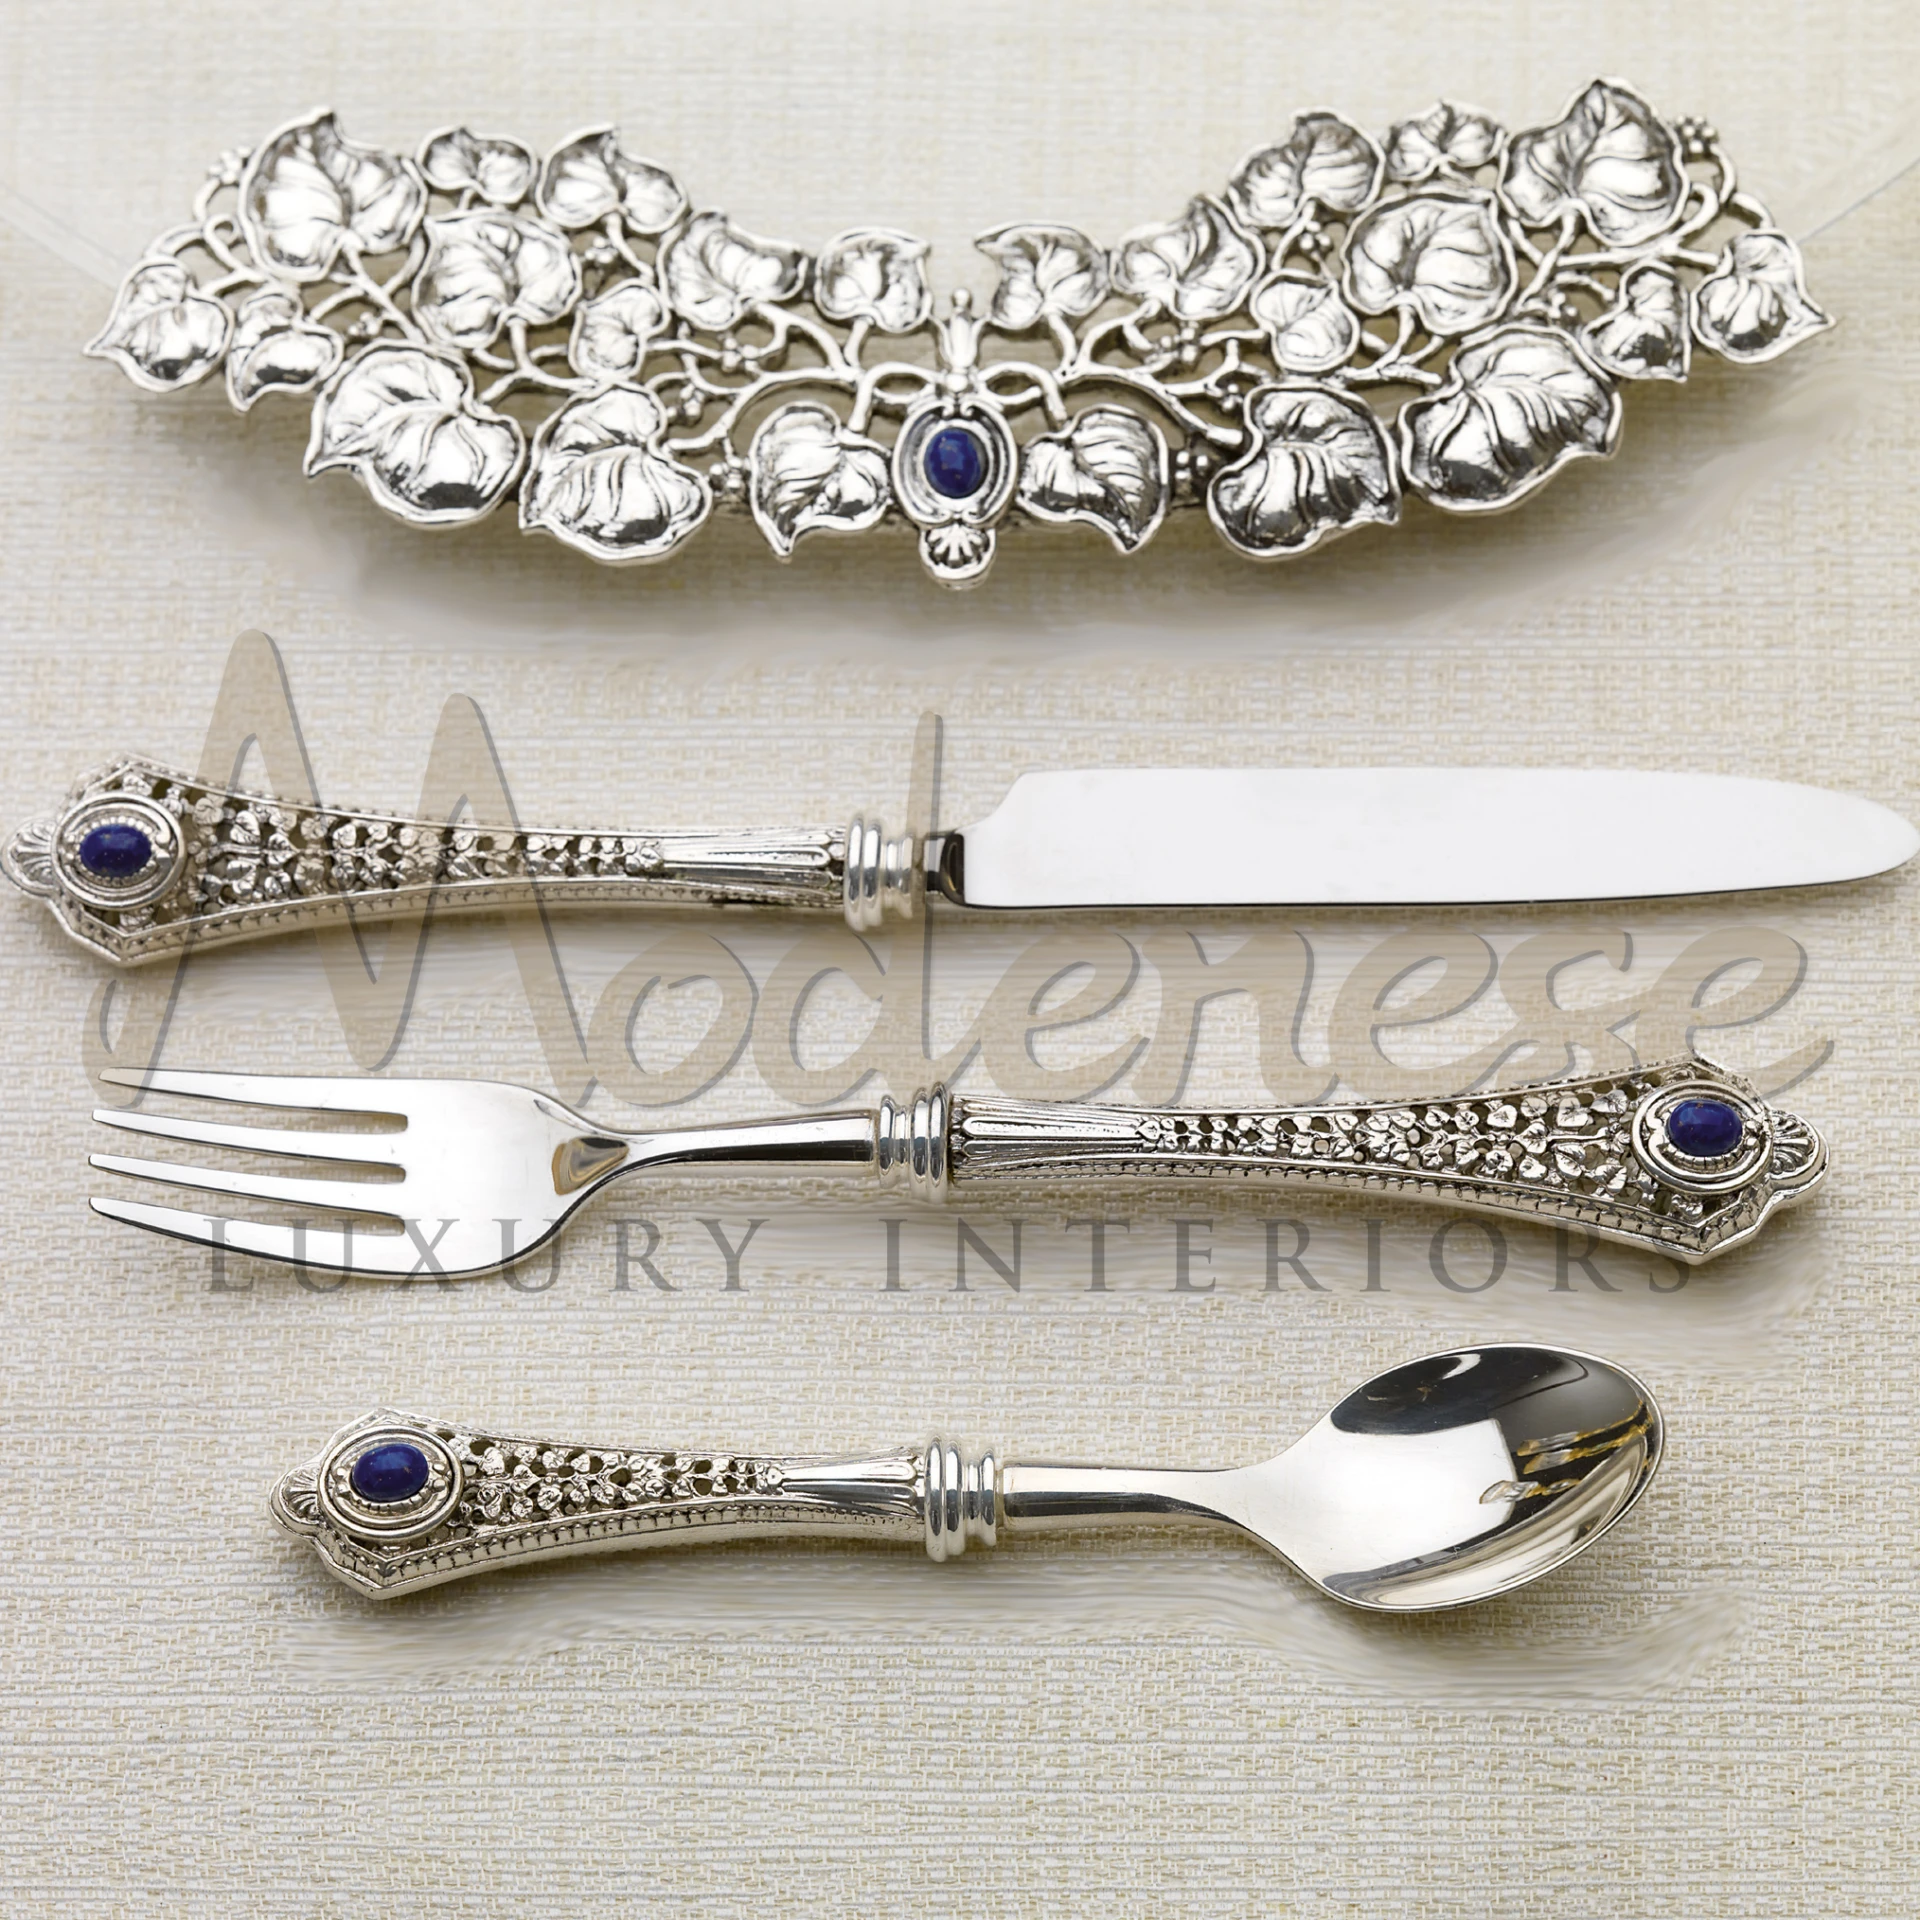 Luxurious silver fork, knife, and spoon with decorative handles and sapphire accents, paired with a floral knife holder